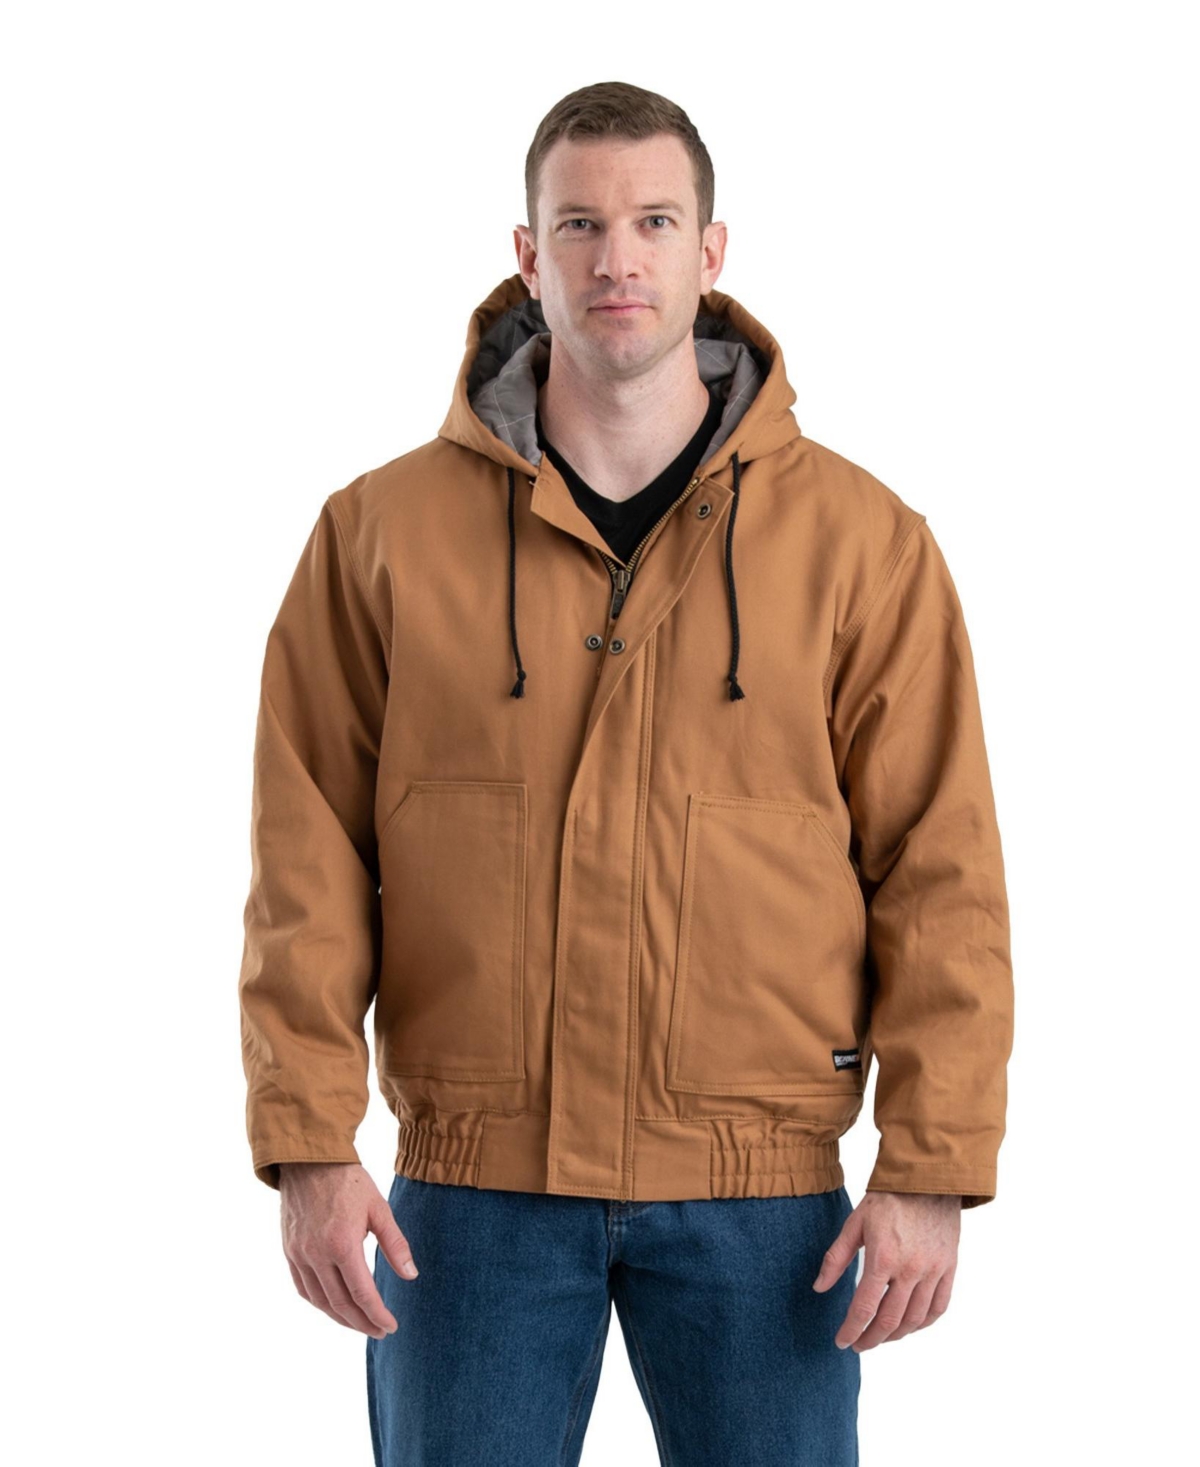 Big & Tall Flame Resistant Duck Hooded Jacket - Brown duck